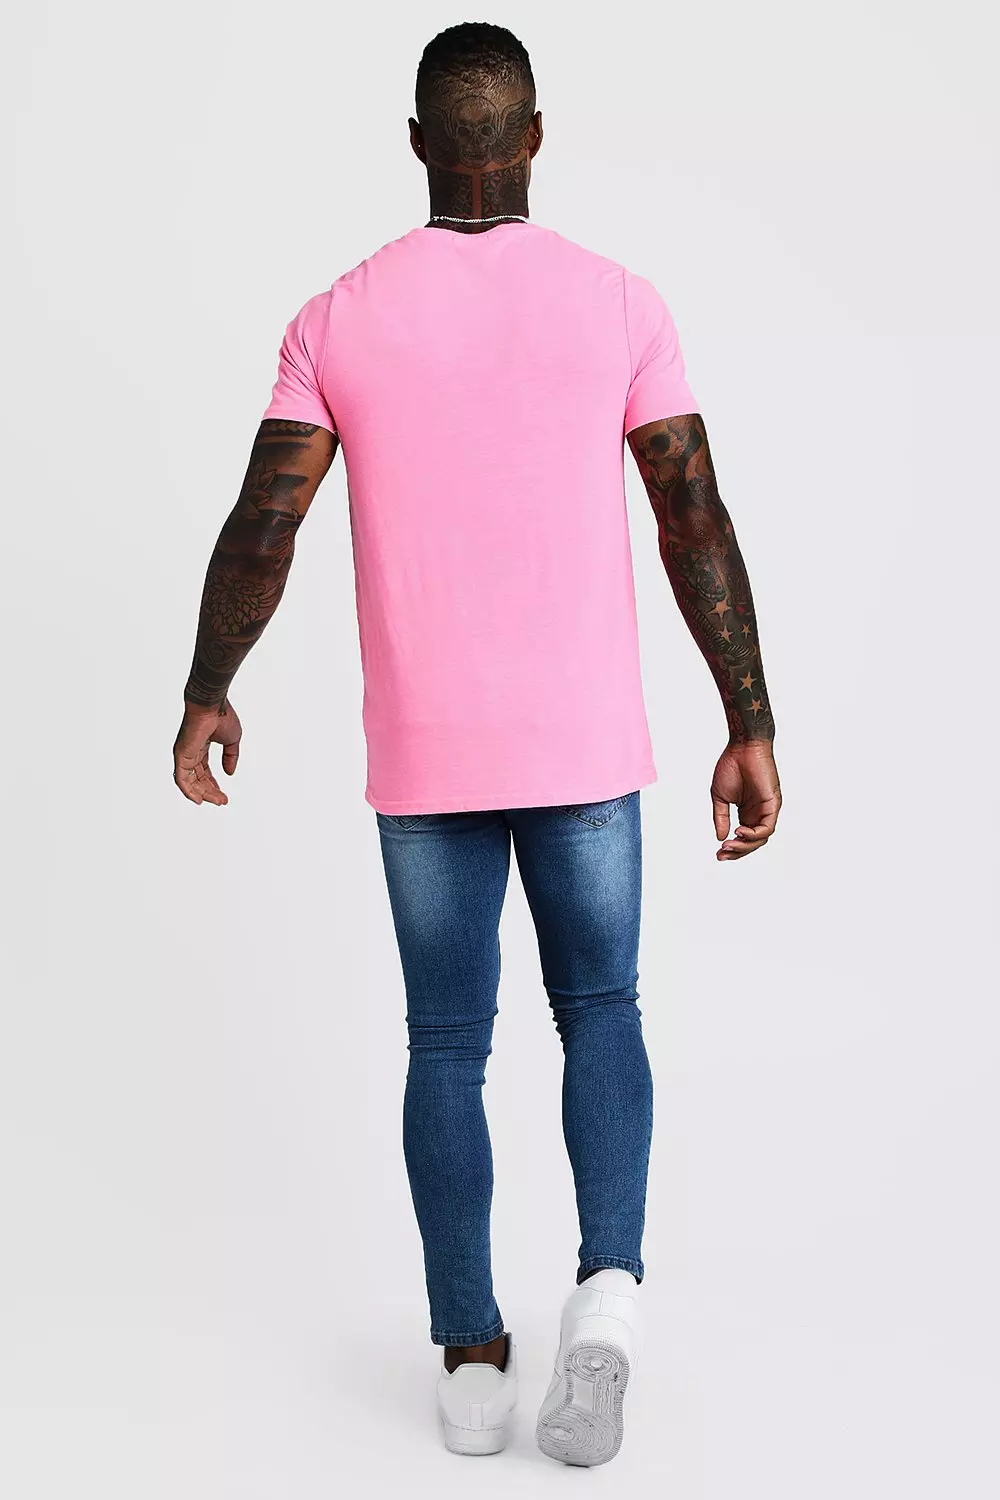 T-Shirt Men Rhinestone Pink Large Size 4XL Spring Personalized Trend High  Quality Short Sleeve Round Neck Tees New 2021 Male Top